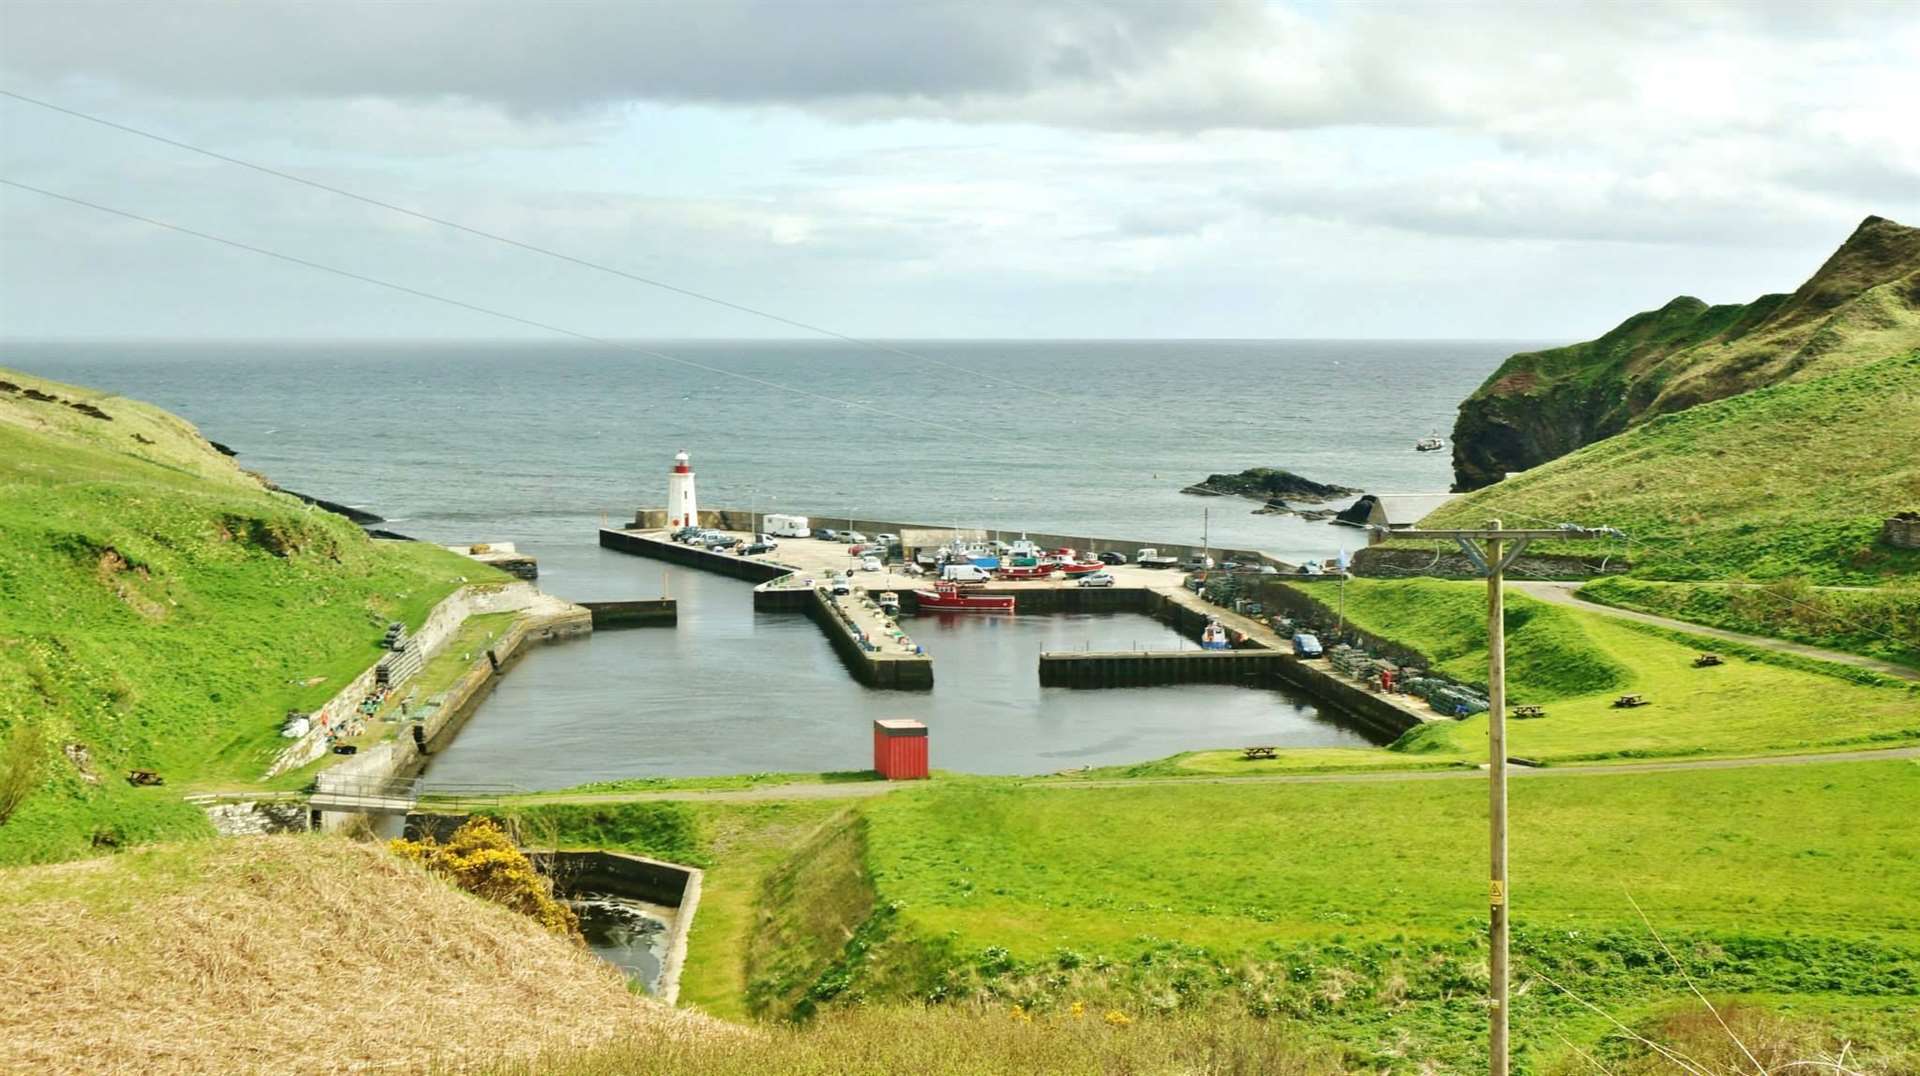 Lybster Harbour was used for a key scene in Netflix drama The Crown. Picture: DGS